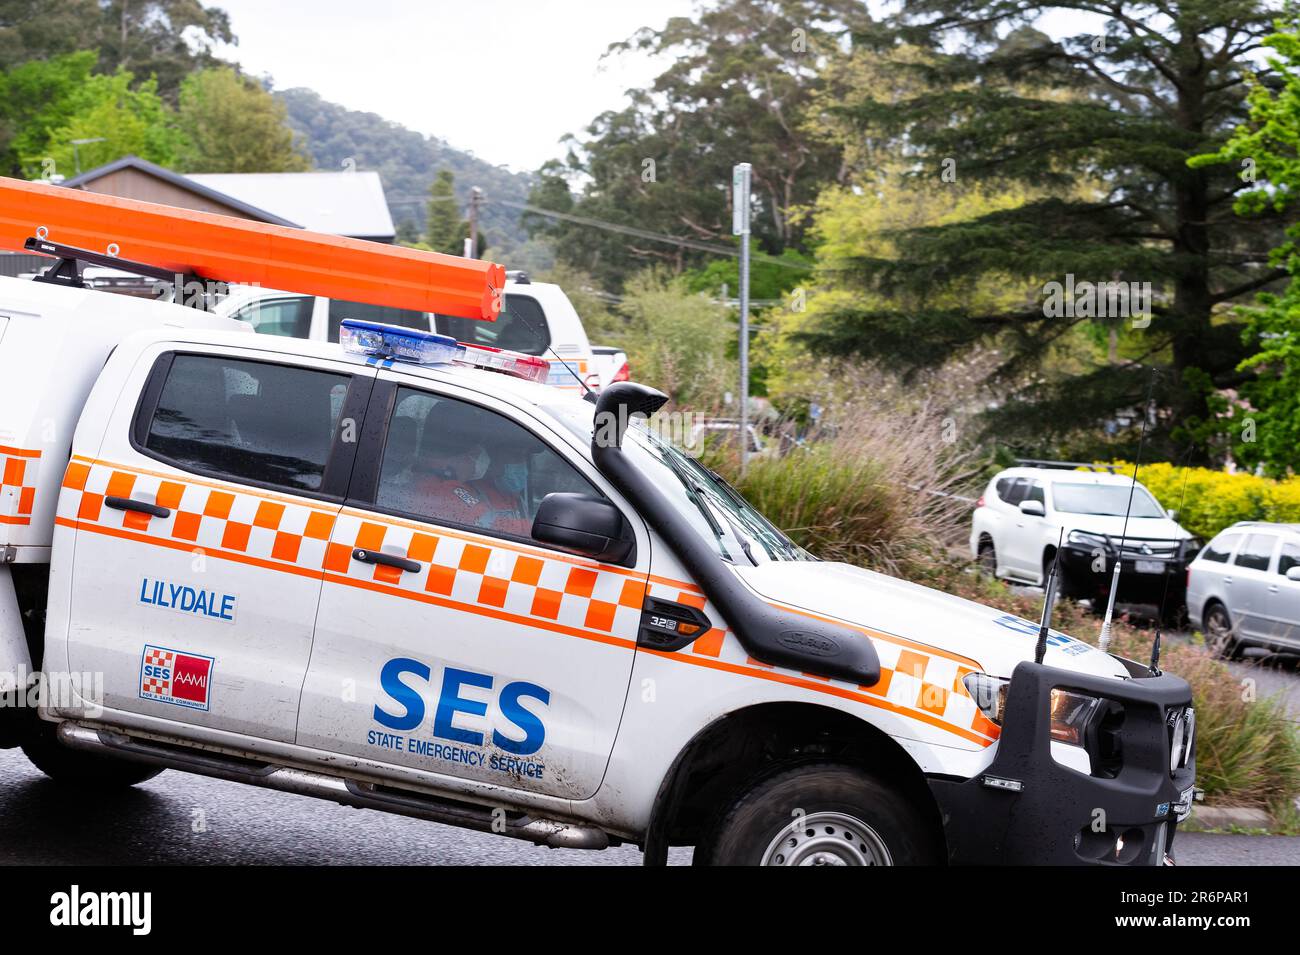 MELBOURNE, VIC - SEPTEMBER 23: An SES crew joins the search as Police and SES continue to search for missing 14 year old autistic boy, William Wall after he went missing two days ago in dense bushland on September 23, 2020 in Melbourne, Australia. A massive search in the Yarra Ranges is underway for missing autistic teen who spent the night lost in the bush. Multiple Crews, including police, the Airwing and SES searched for William as temperatures dropped to 7C overnight. Rain is predicted Wednesday and will impact the search efforts. Stock Photo